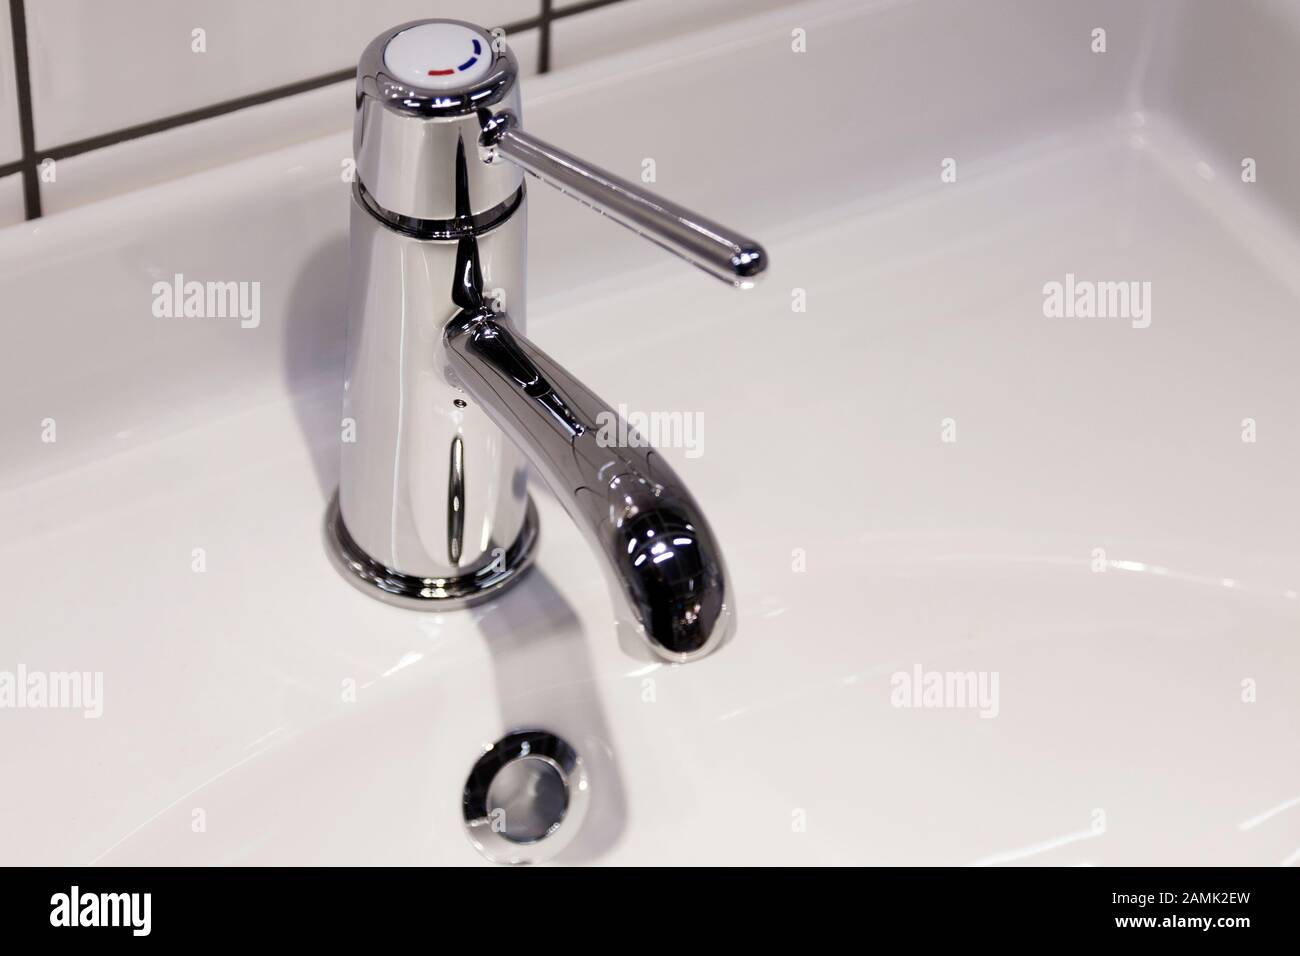 New Faucet In Bathroom With Parts Of Sink Stock Photo Alamy